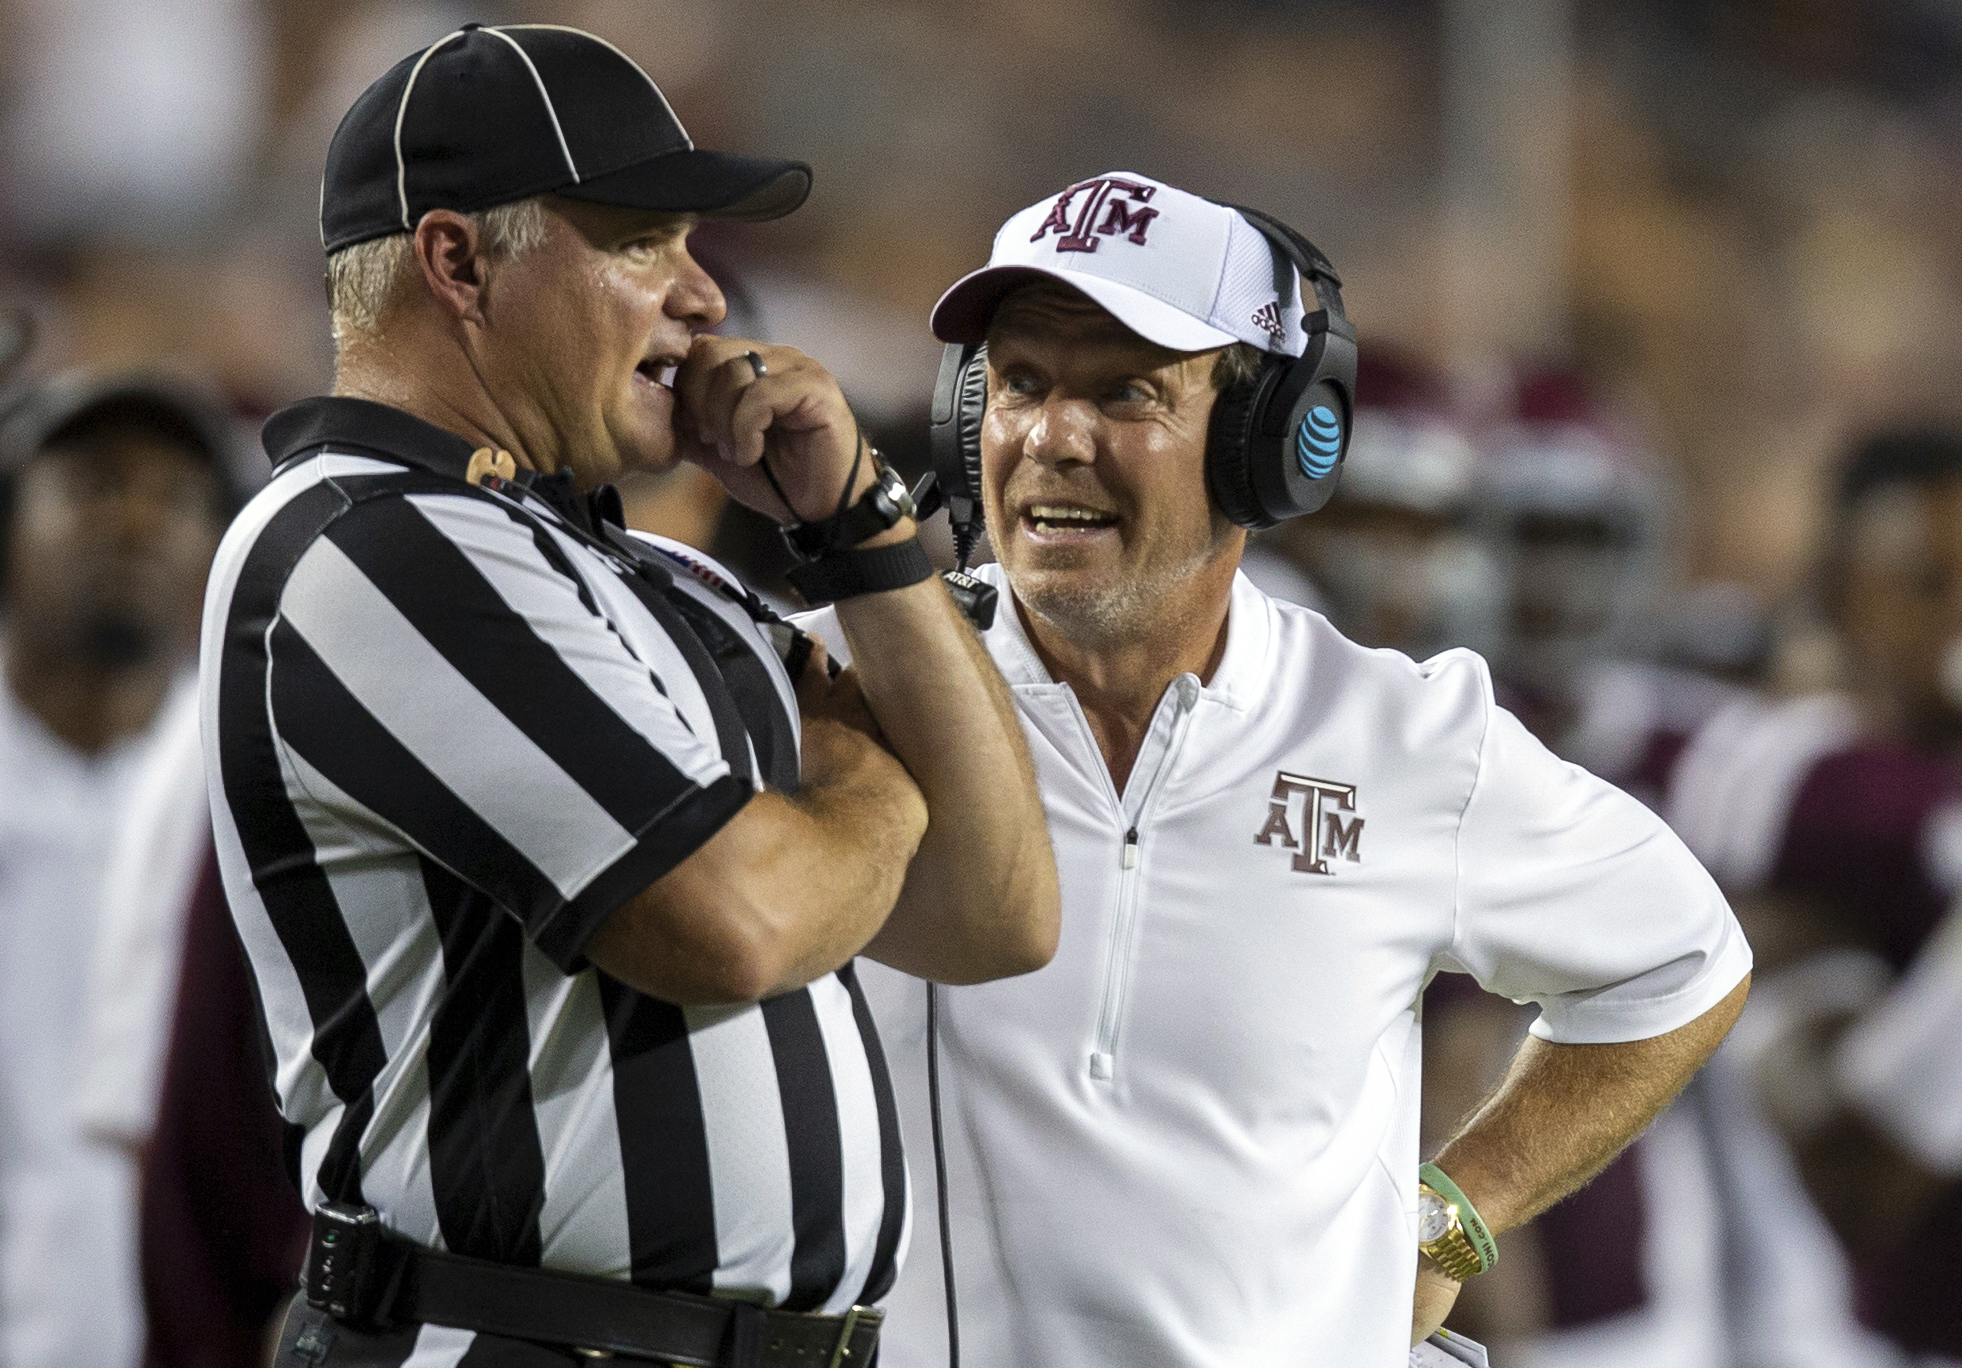 Texas A&M going for record 7th win in row over Arkansas